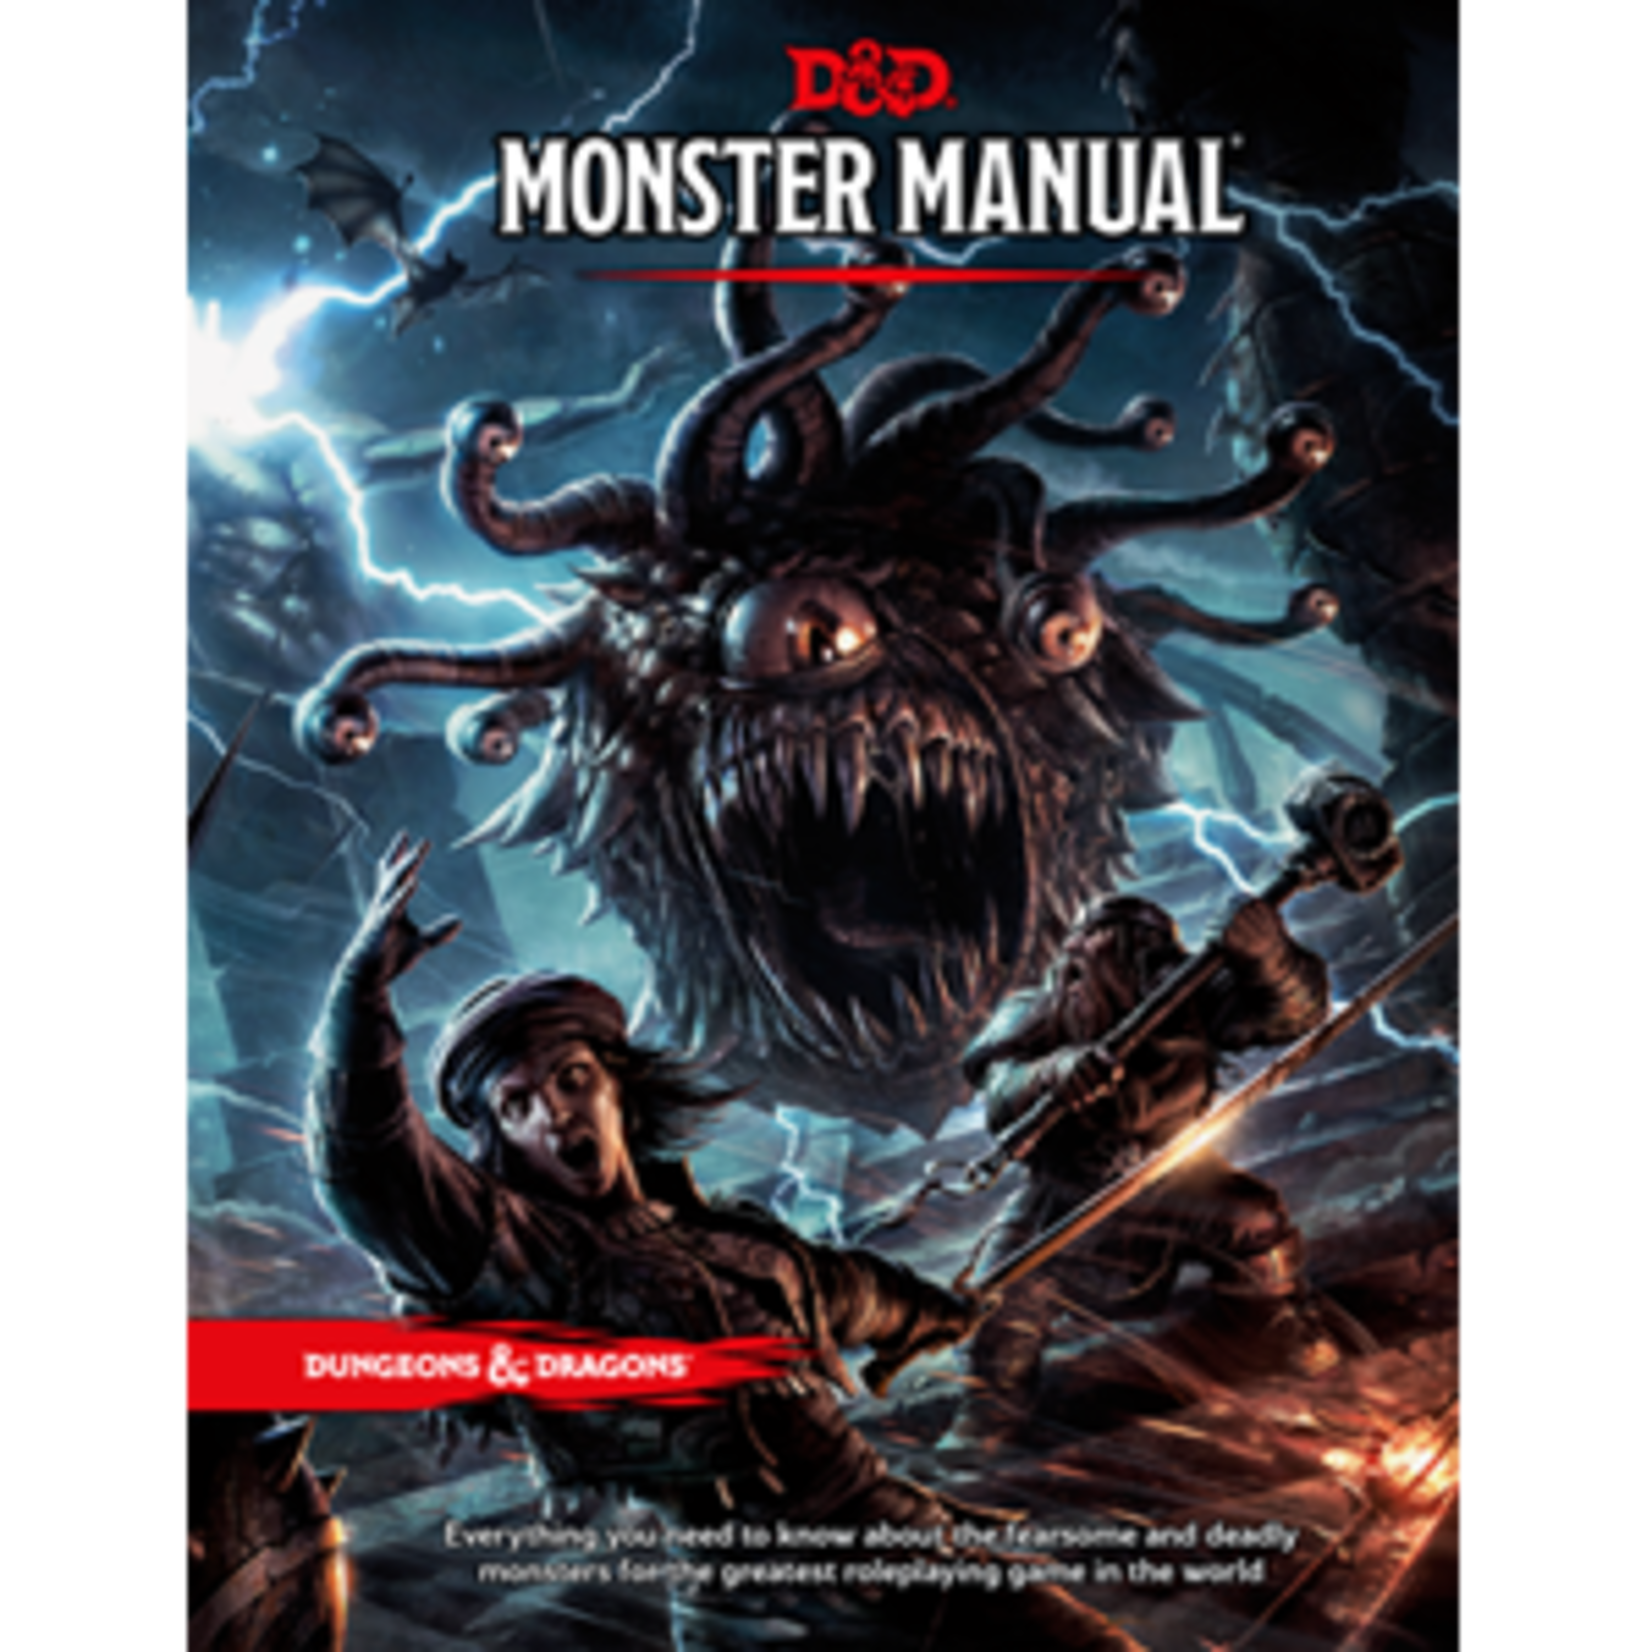 Dungeons & Dragons Dungeons & Dragons 5e Monster Manual